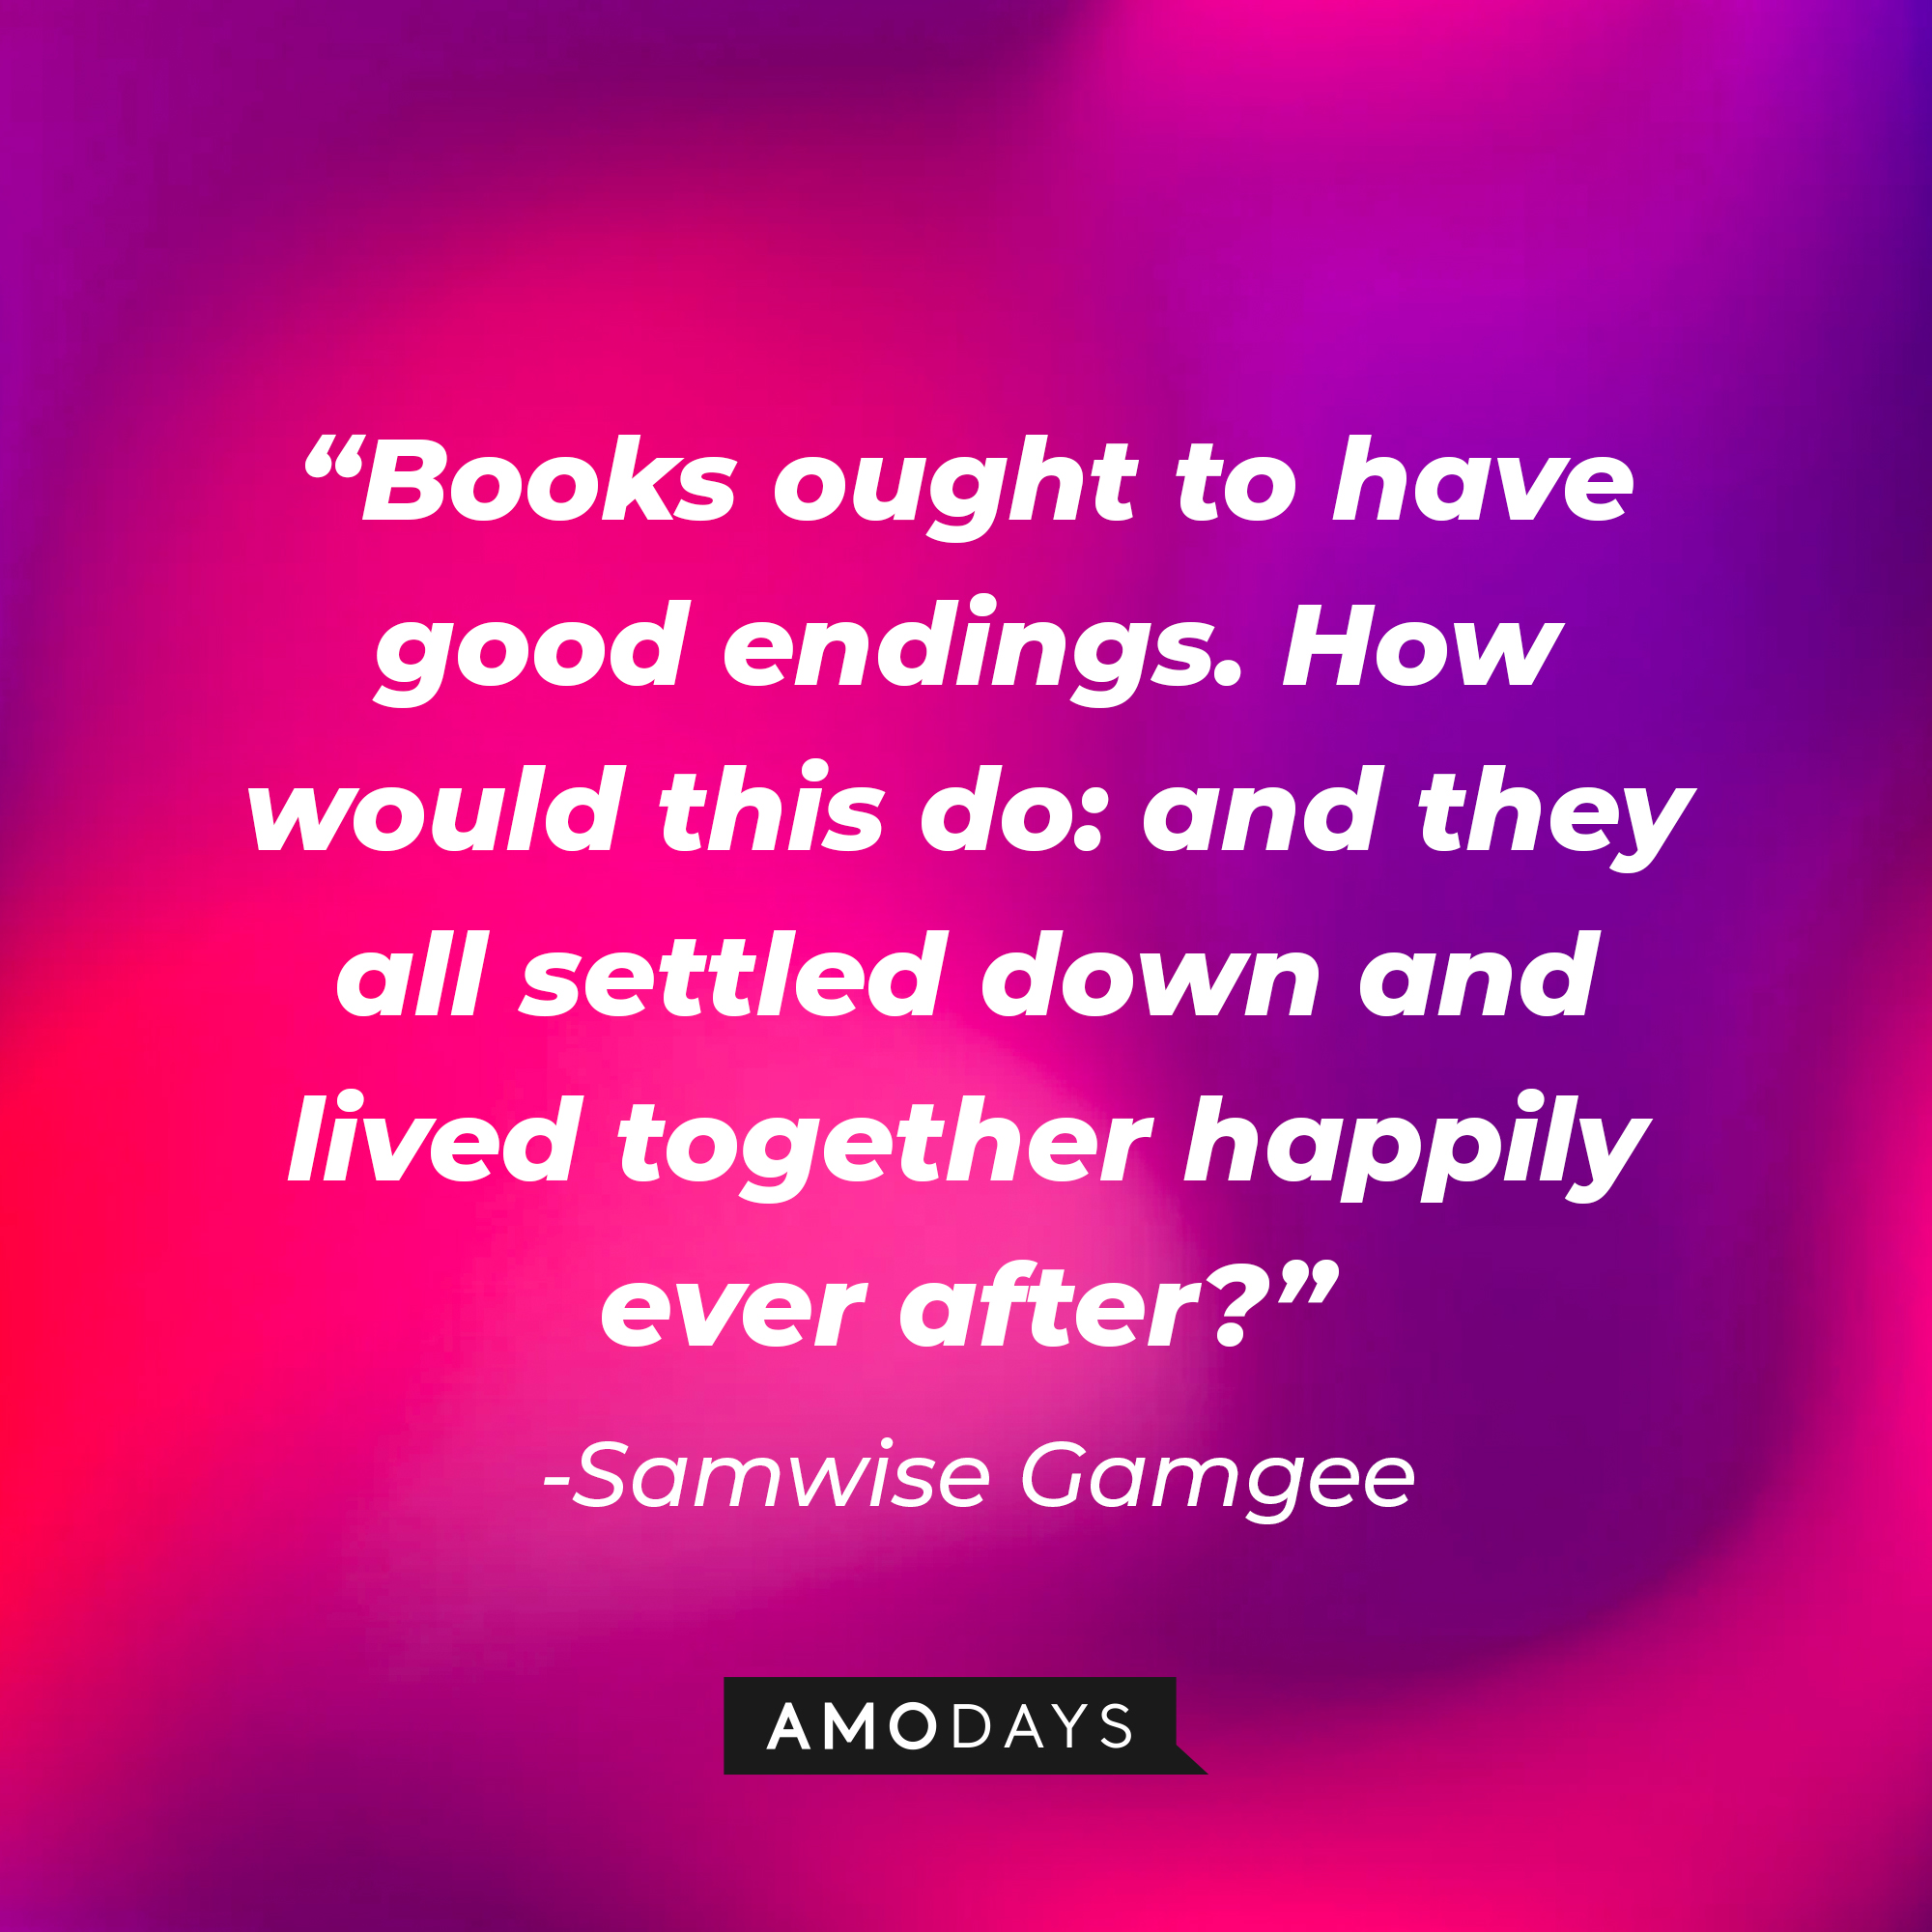 Samwise Gamgee's quote: “Books ought to have good endings. How would this do: and they all settled down and lived together happily ever after?” | Source: Amodays